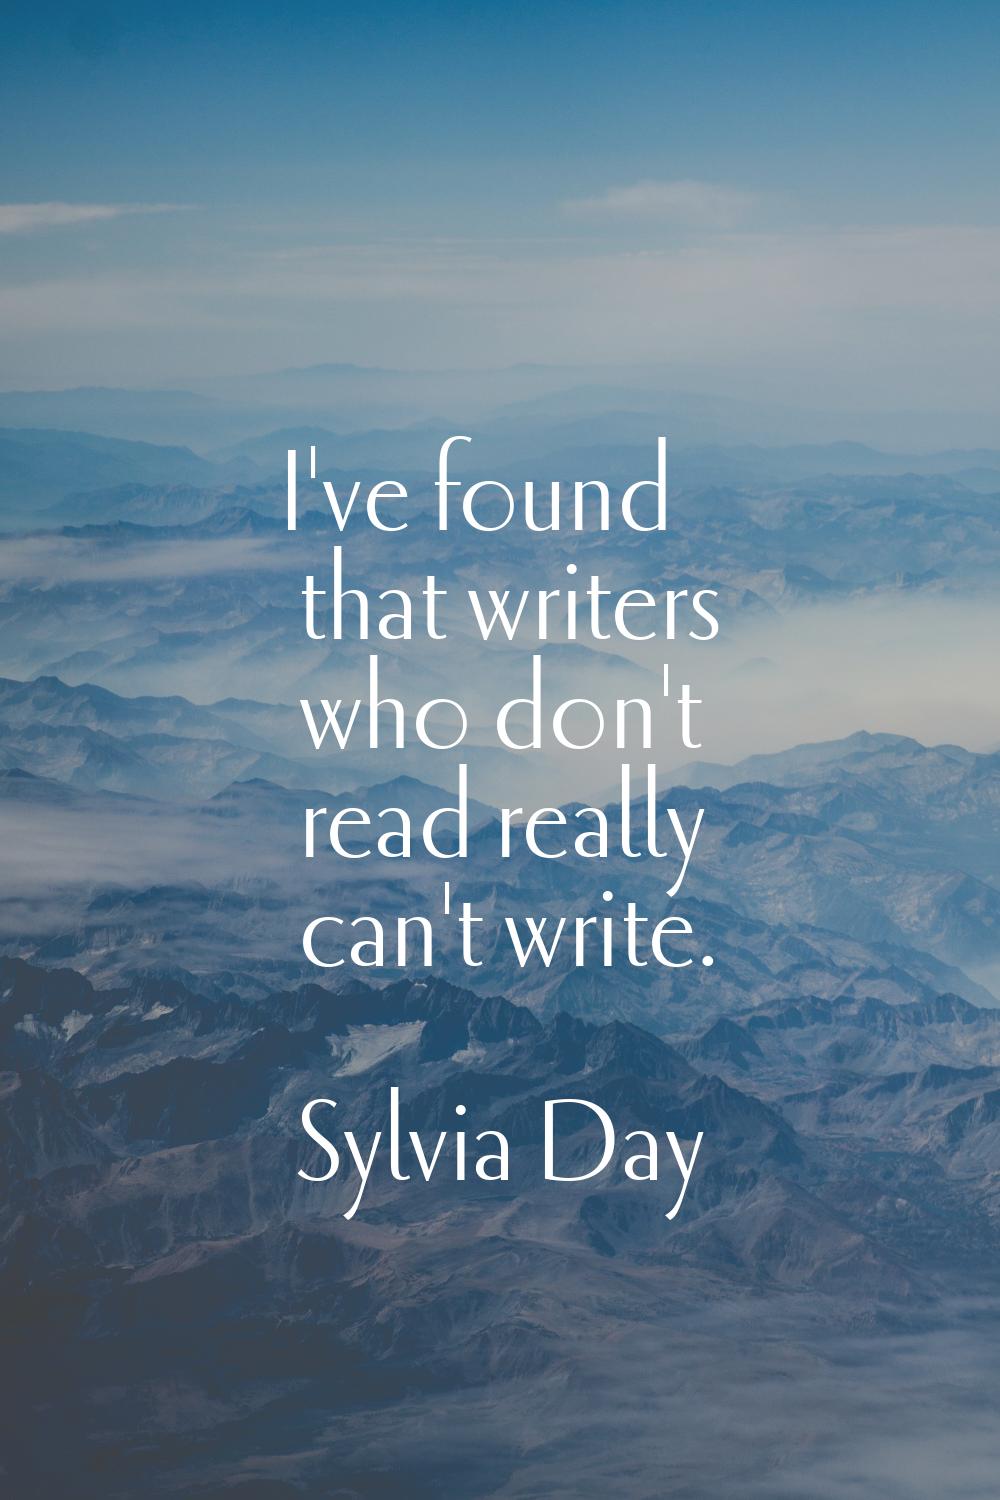 I've found that writers who don't read really can't write.